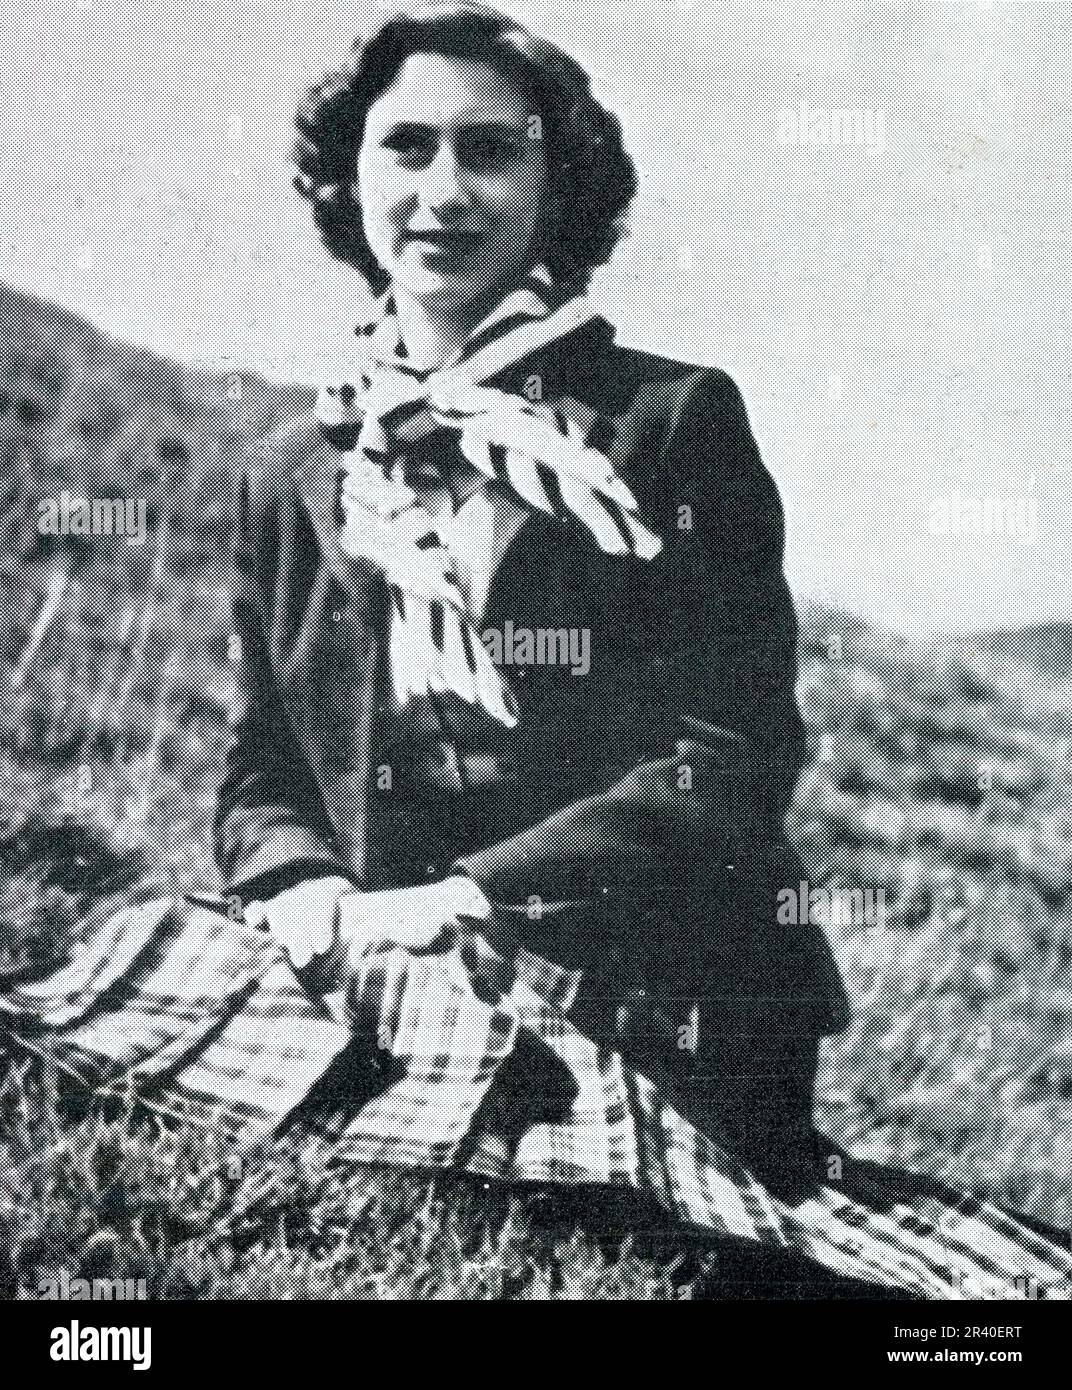 A relaxed informal photograph of HRH Princess Margared, wearing a kilt, on the moors near Balmoral, Scotland,  in August 1951 just a few months before the King's early death in February 1952, aged just 56. The royal family frequently had picnincs on the moors when out shooting. This photograph was taken by the Earl of Dalkeith, who later became the 9th duke of Buccleuch. Scotland, U.K. Stock Photo